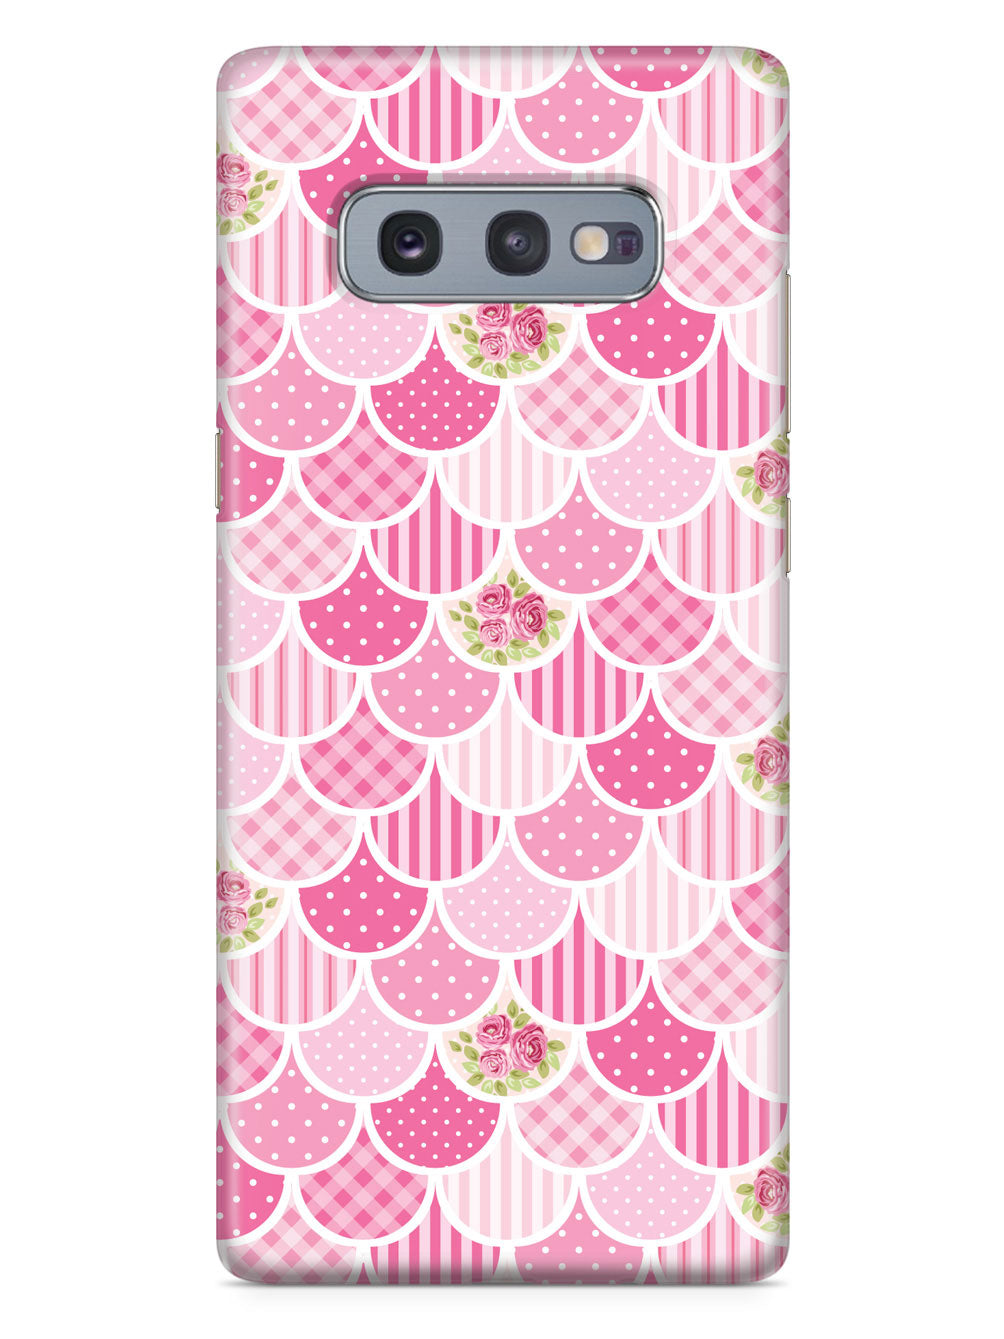 Mermaid Scales - Pink Patchwork - White Case